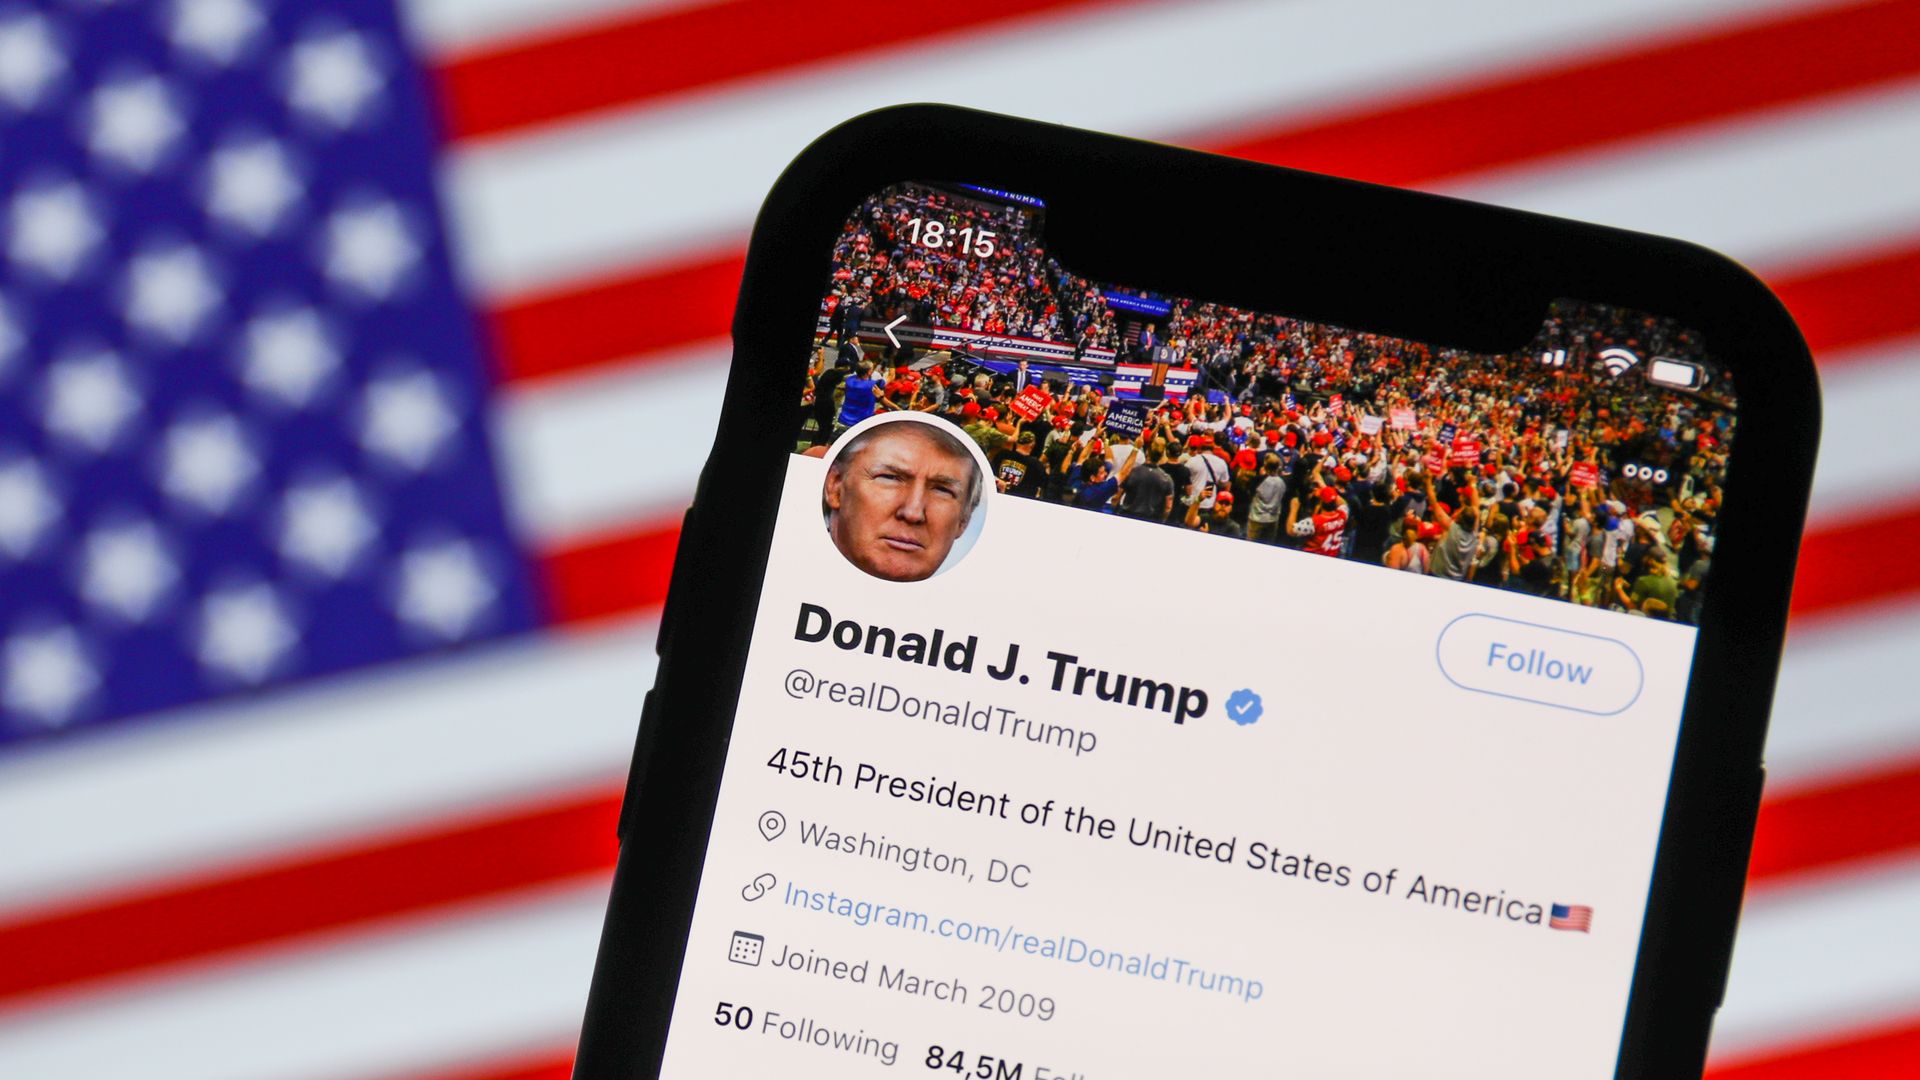 A photo illustration of President Trump's Twitter account on a smartphone screen, with the American flag behind it.